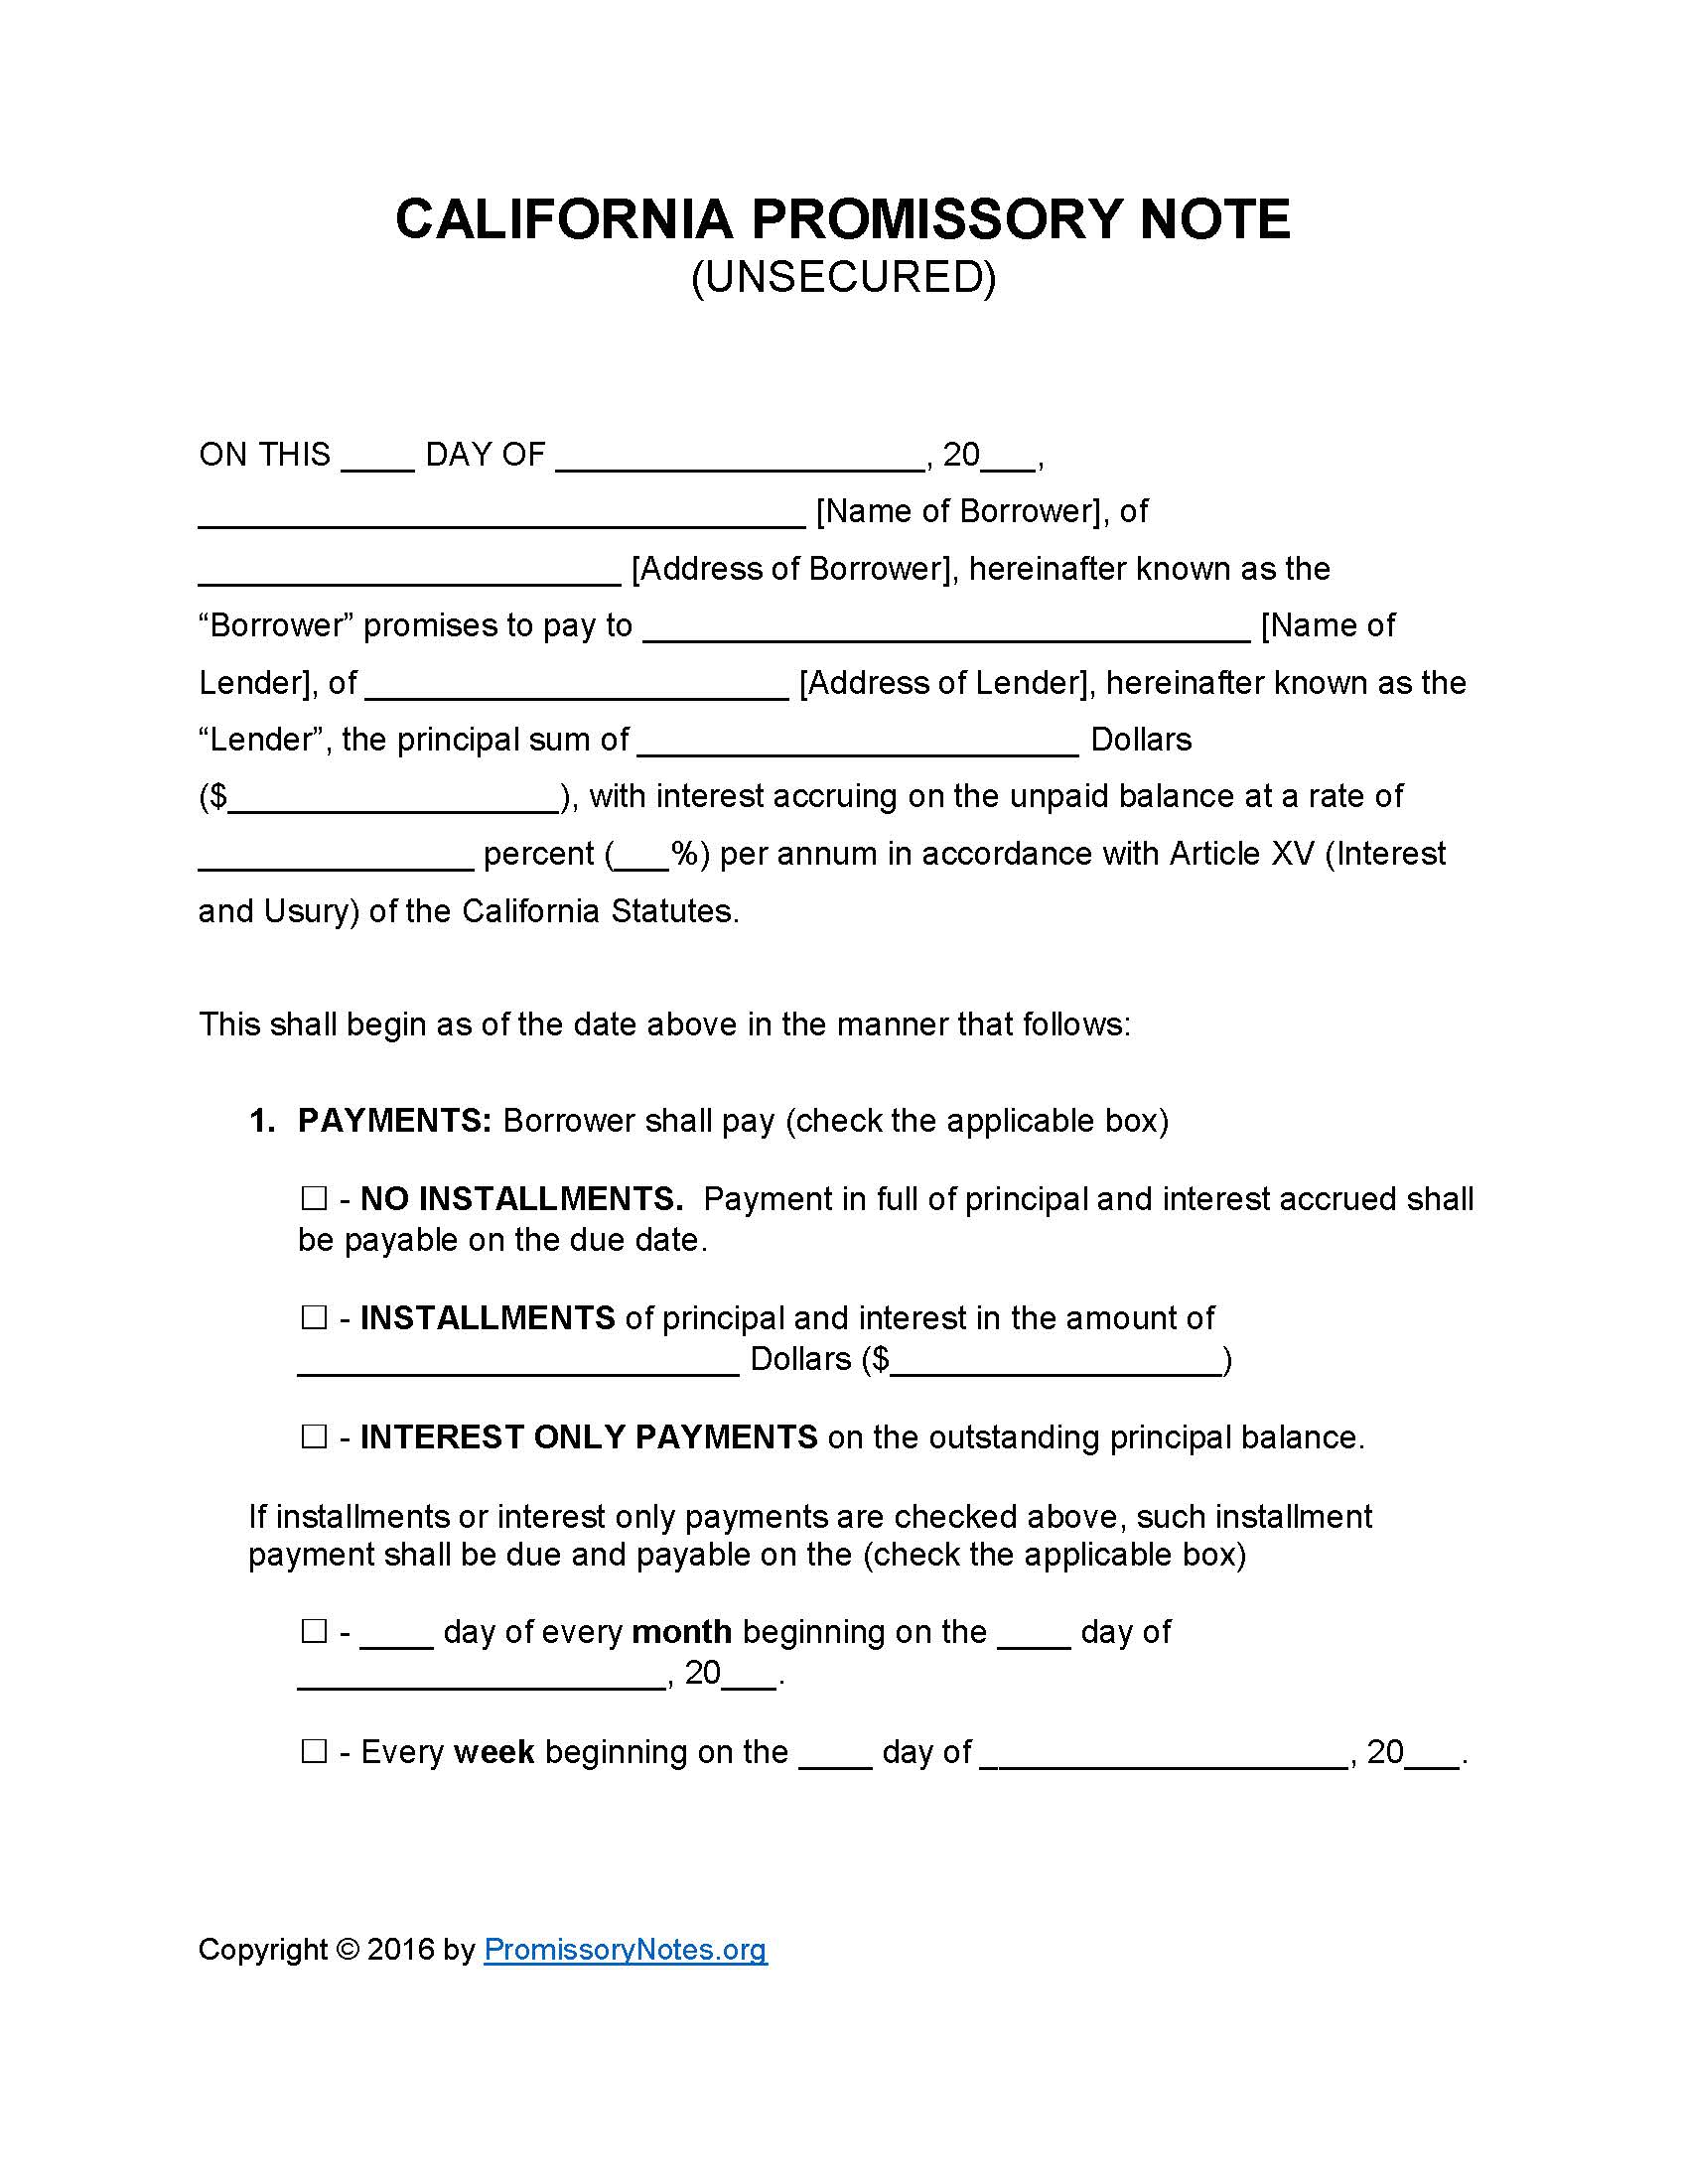 California Unsecured Promissory Note Template - Promissory Notes Intended For Promissory Note California Template